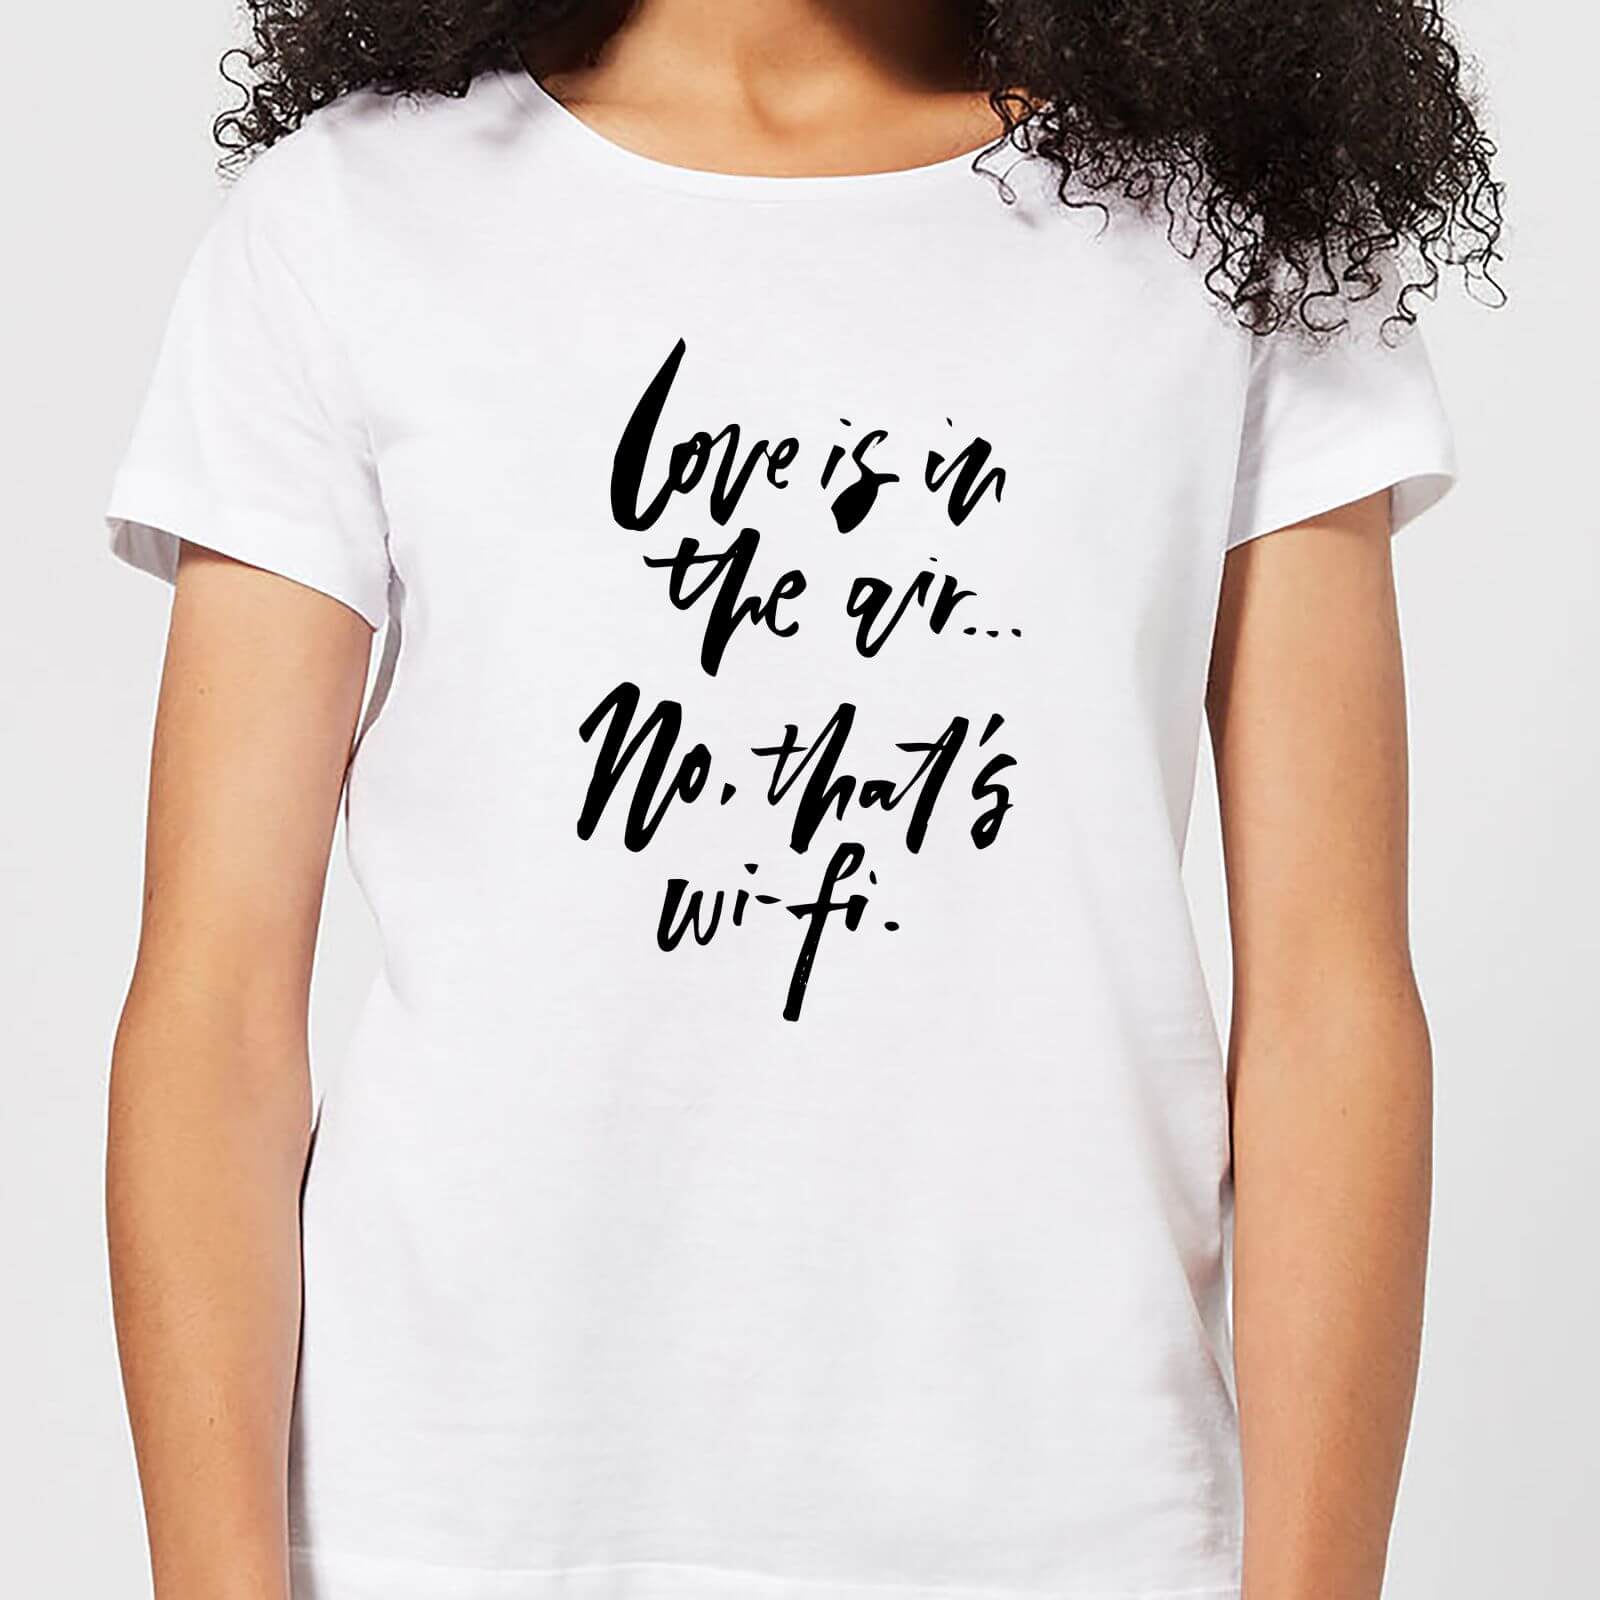 Love Is In The Air Women's T-Shirt - White - S - White